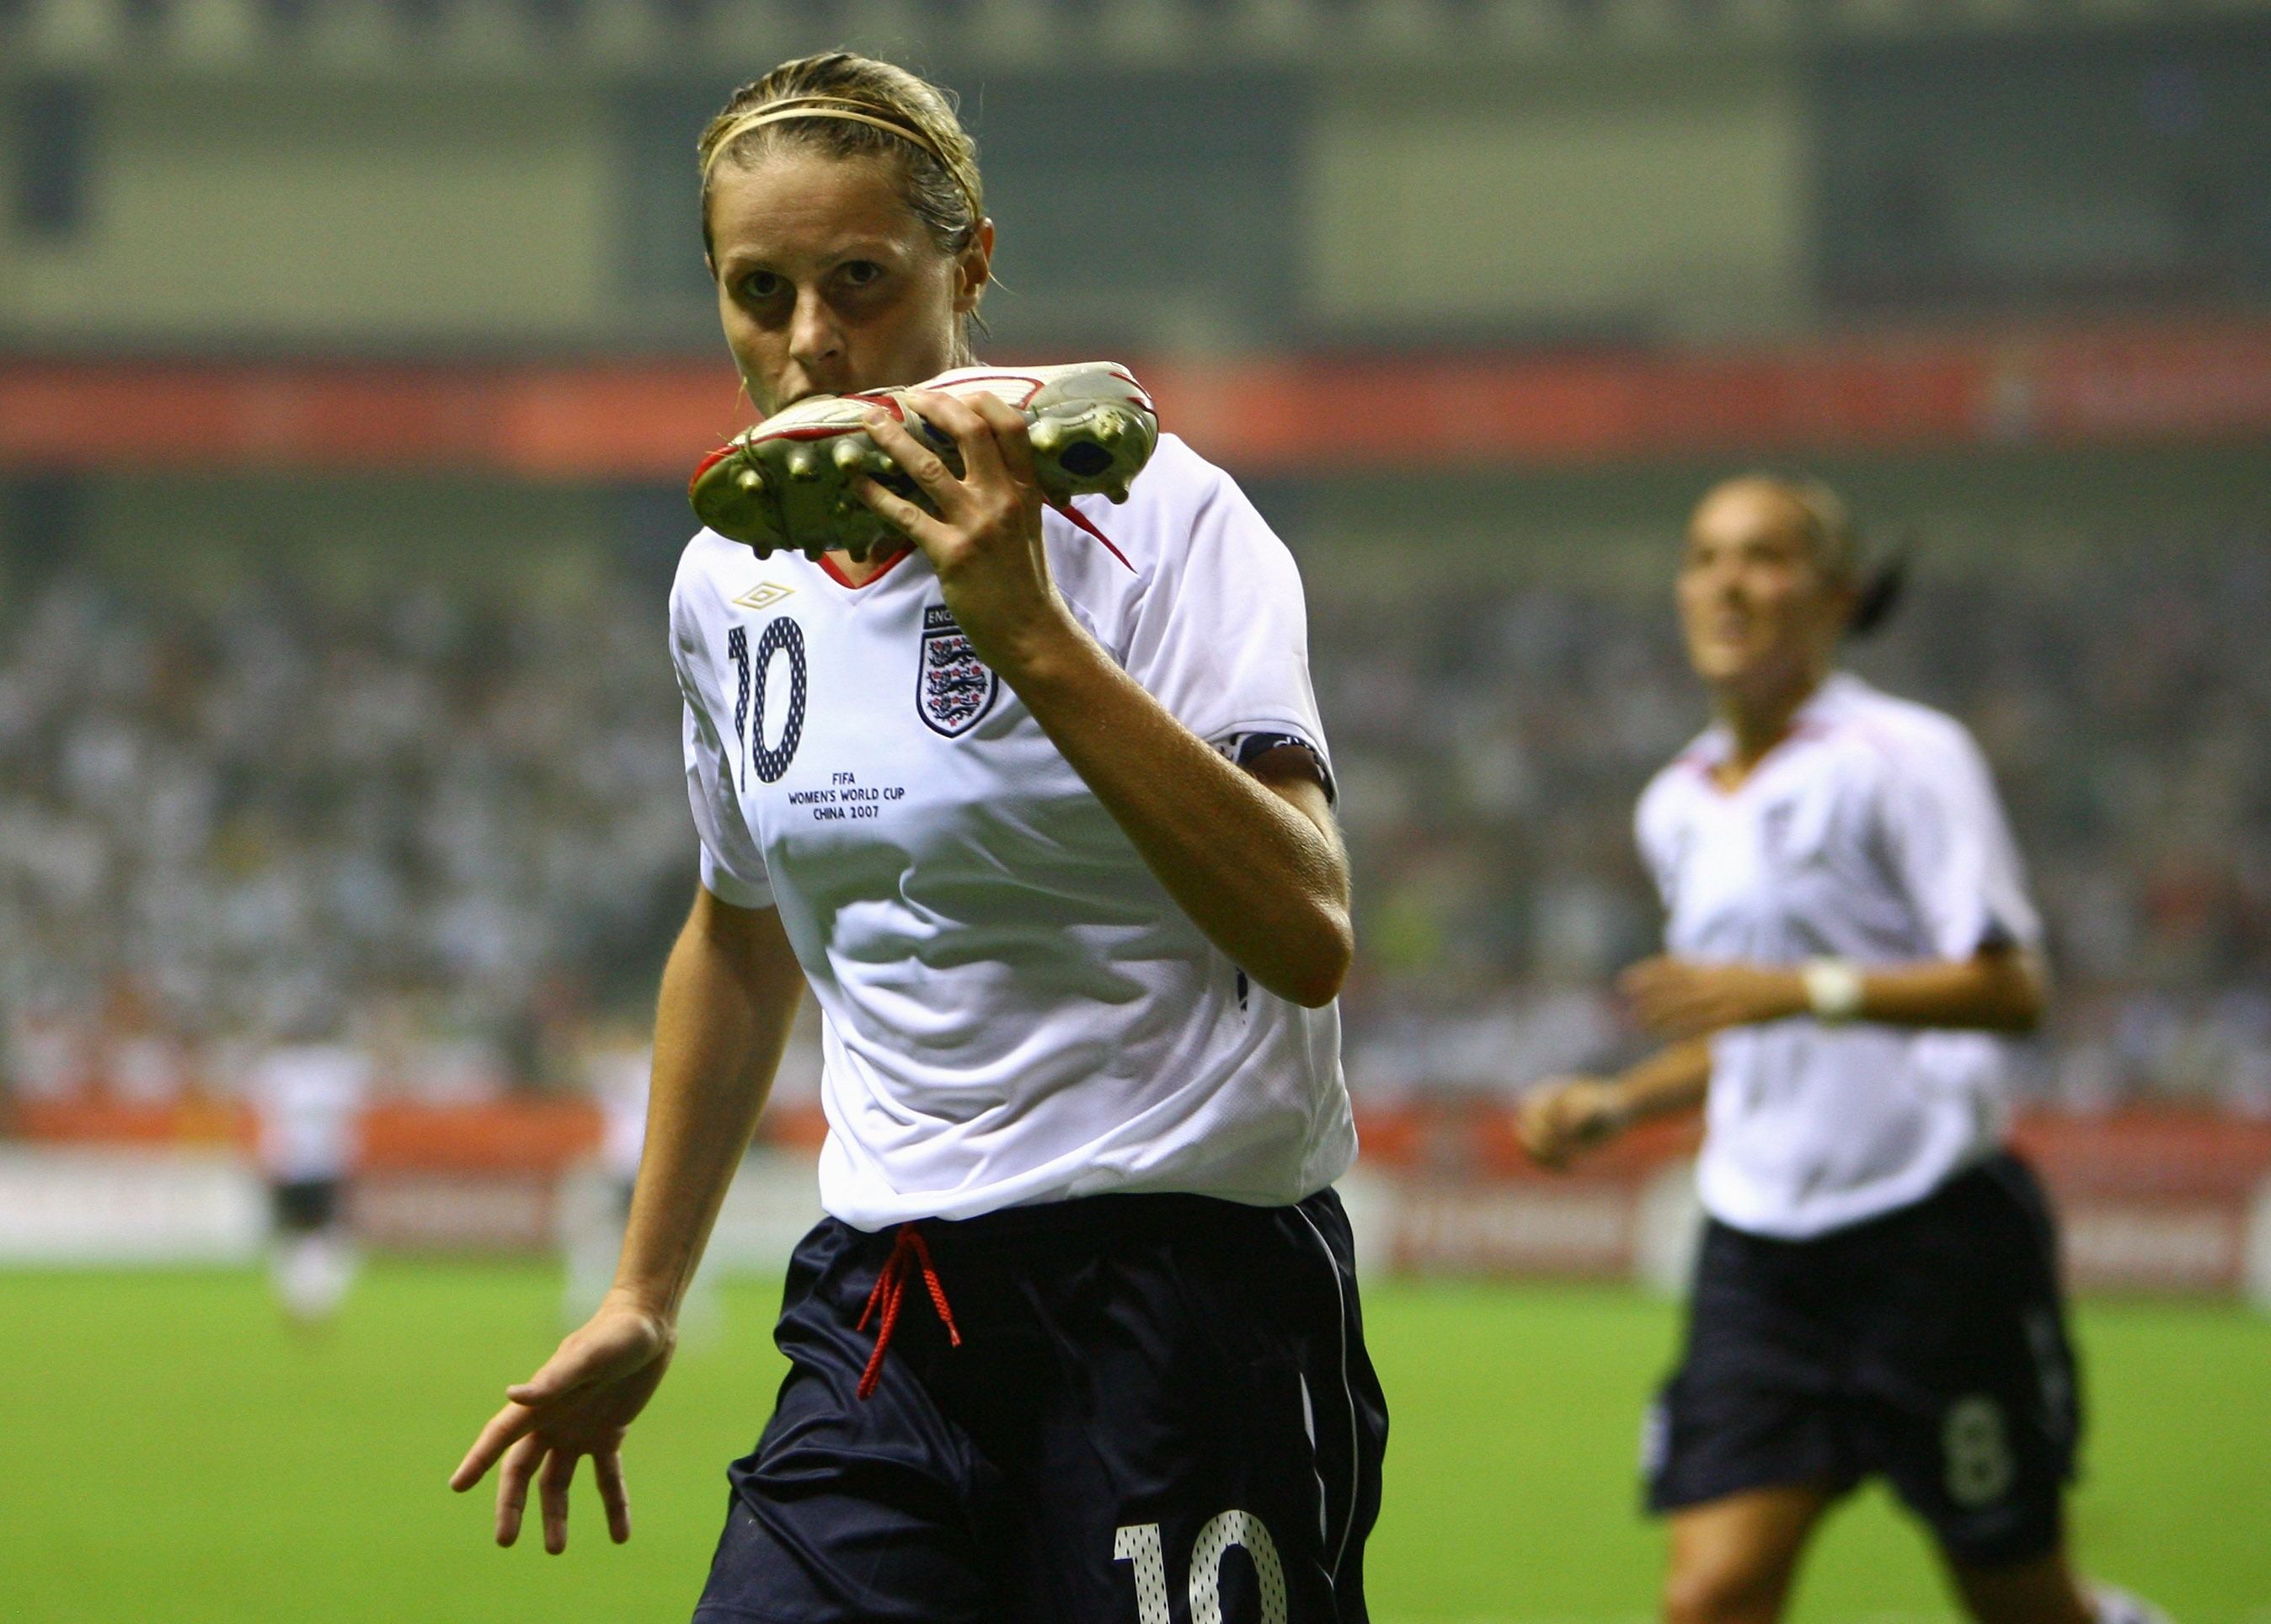 Kelly Smith's iconic goal celebration at 2007 world cup